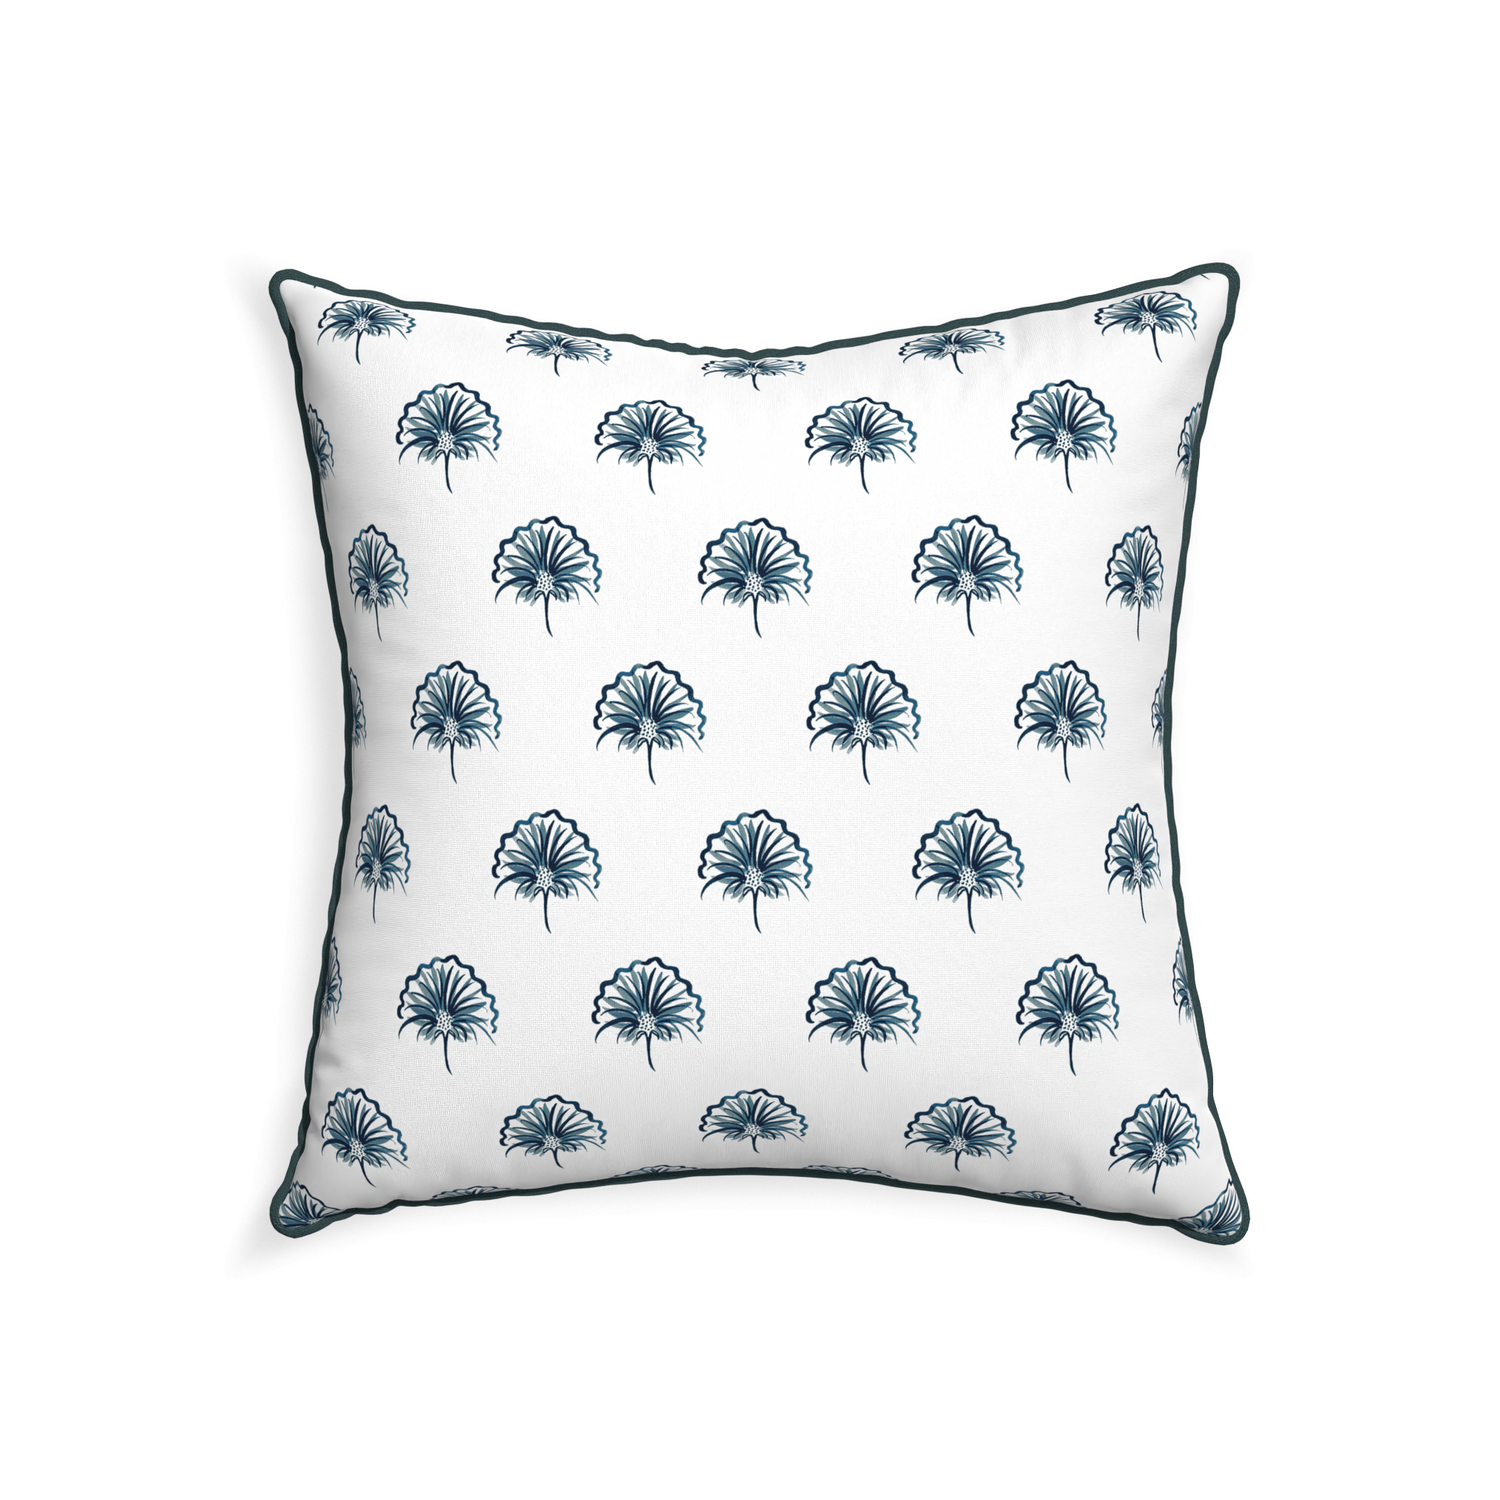 22-square penelope midnight custom floral navypillow with p piping on white background